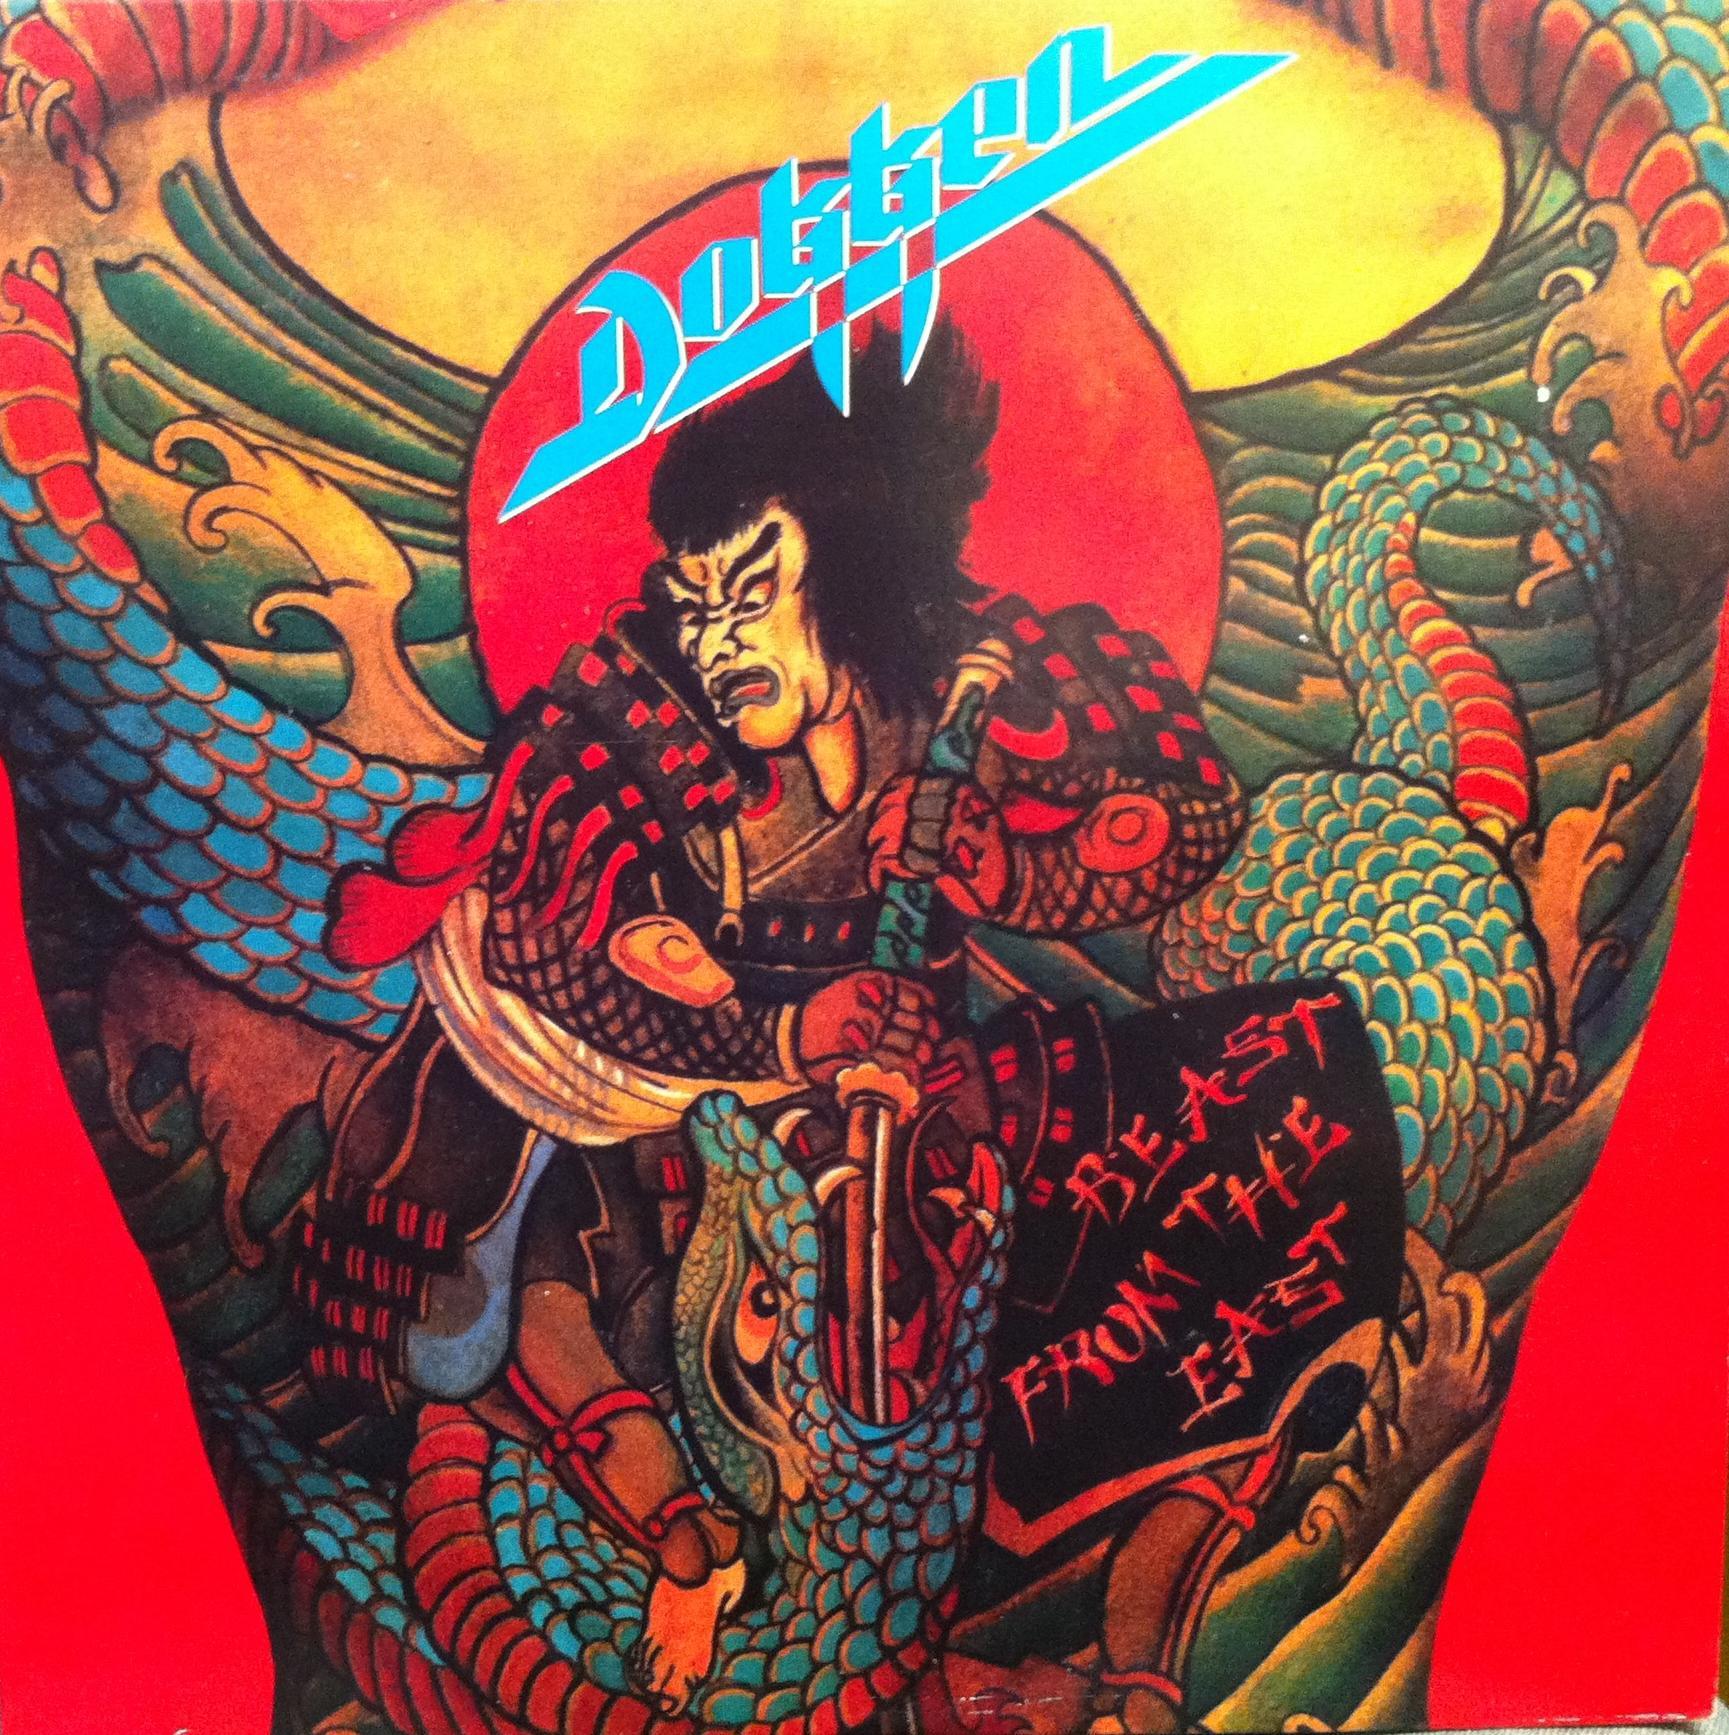 Dokken from the East [1729x1735]